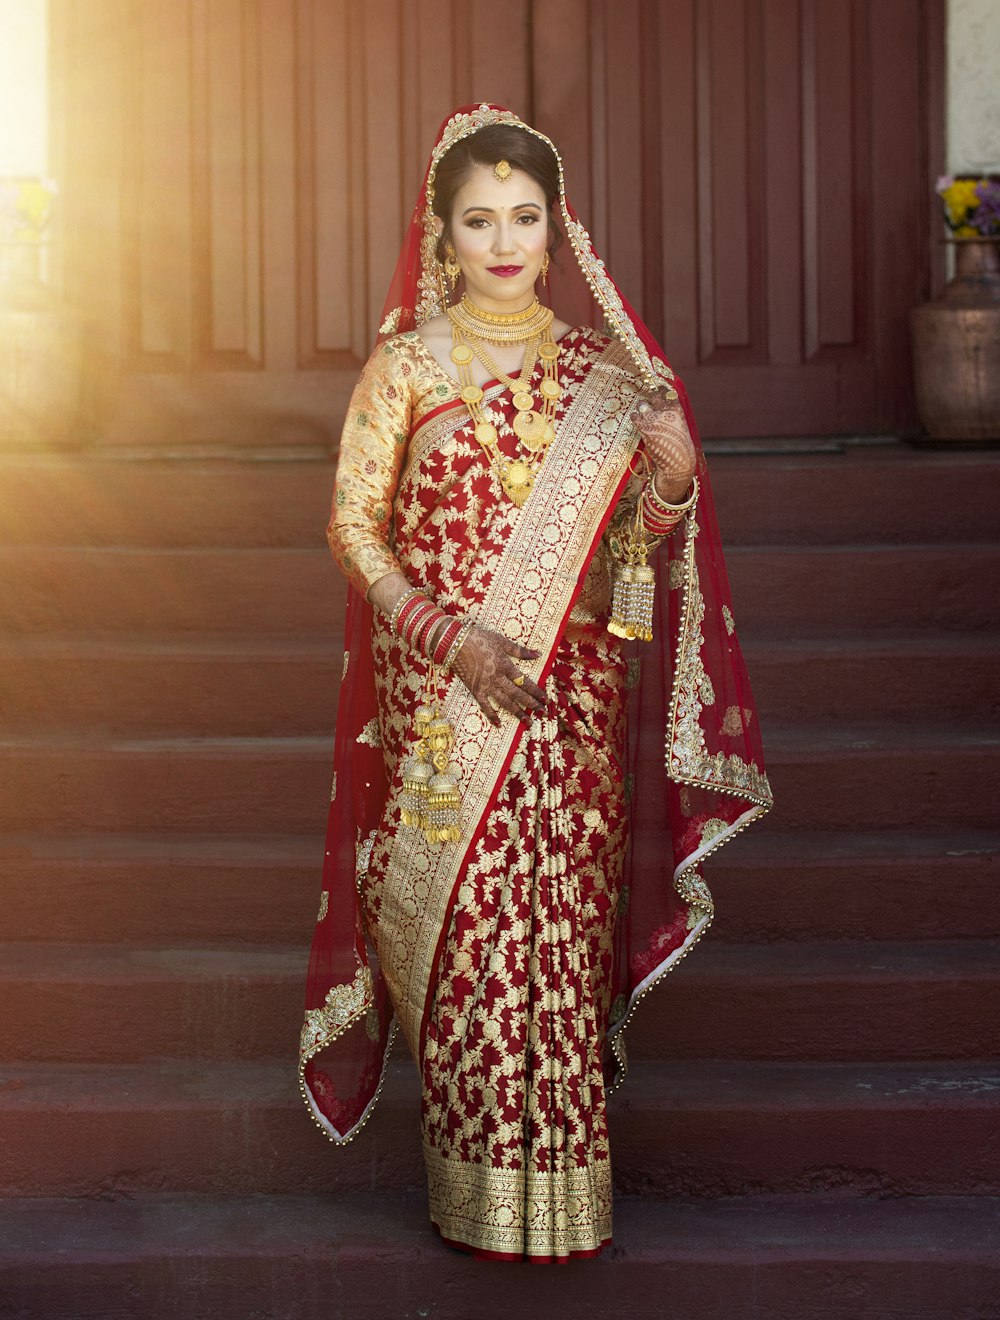 woman in red and brown sari standing on brown wooden floor